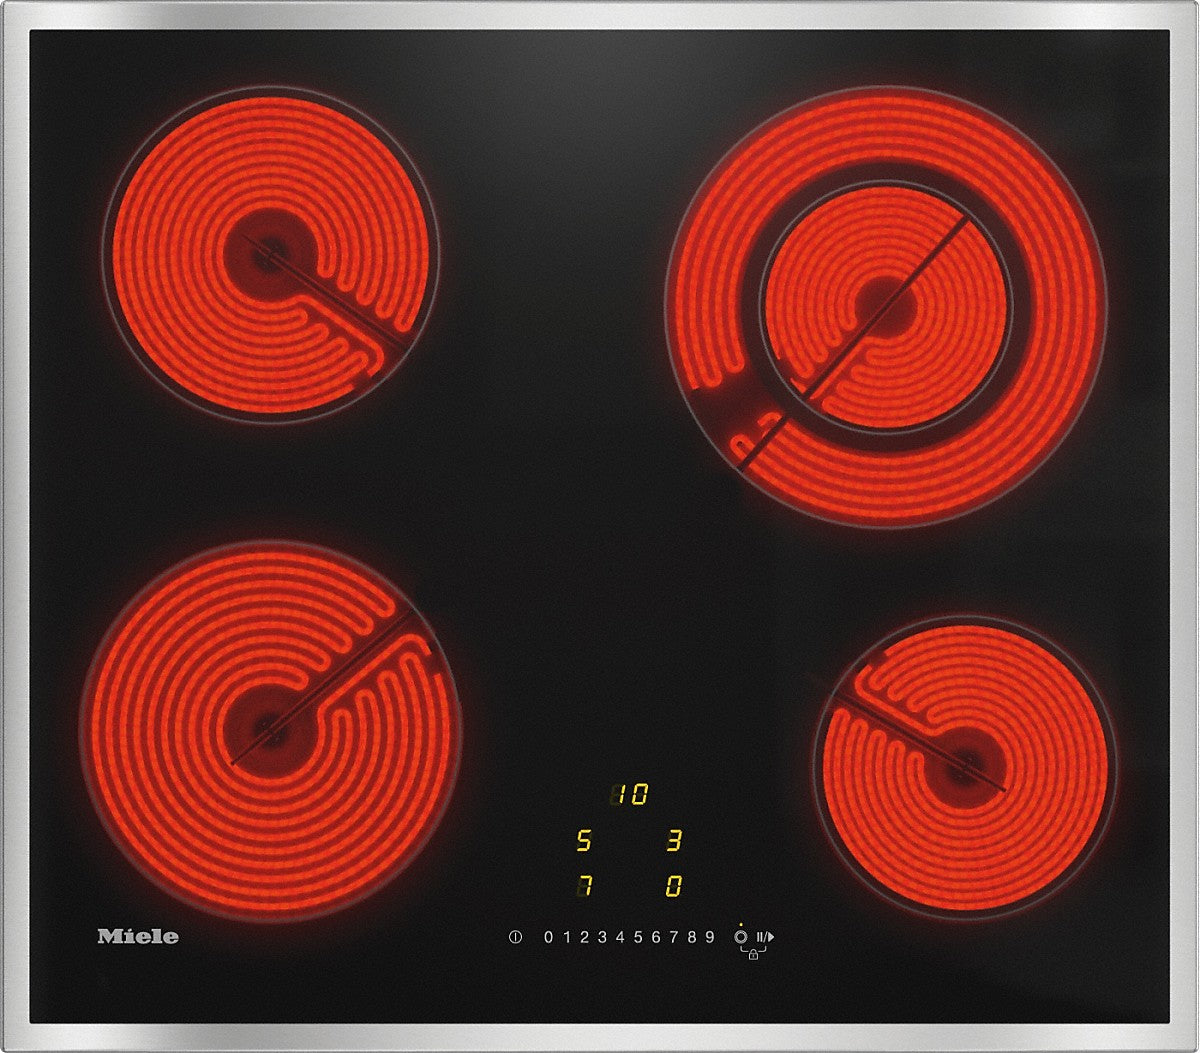 Miele KM 6520 Electric Cooktop with Onset Controls